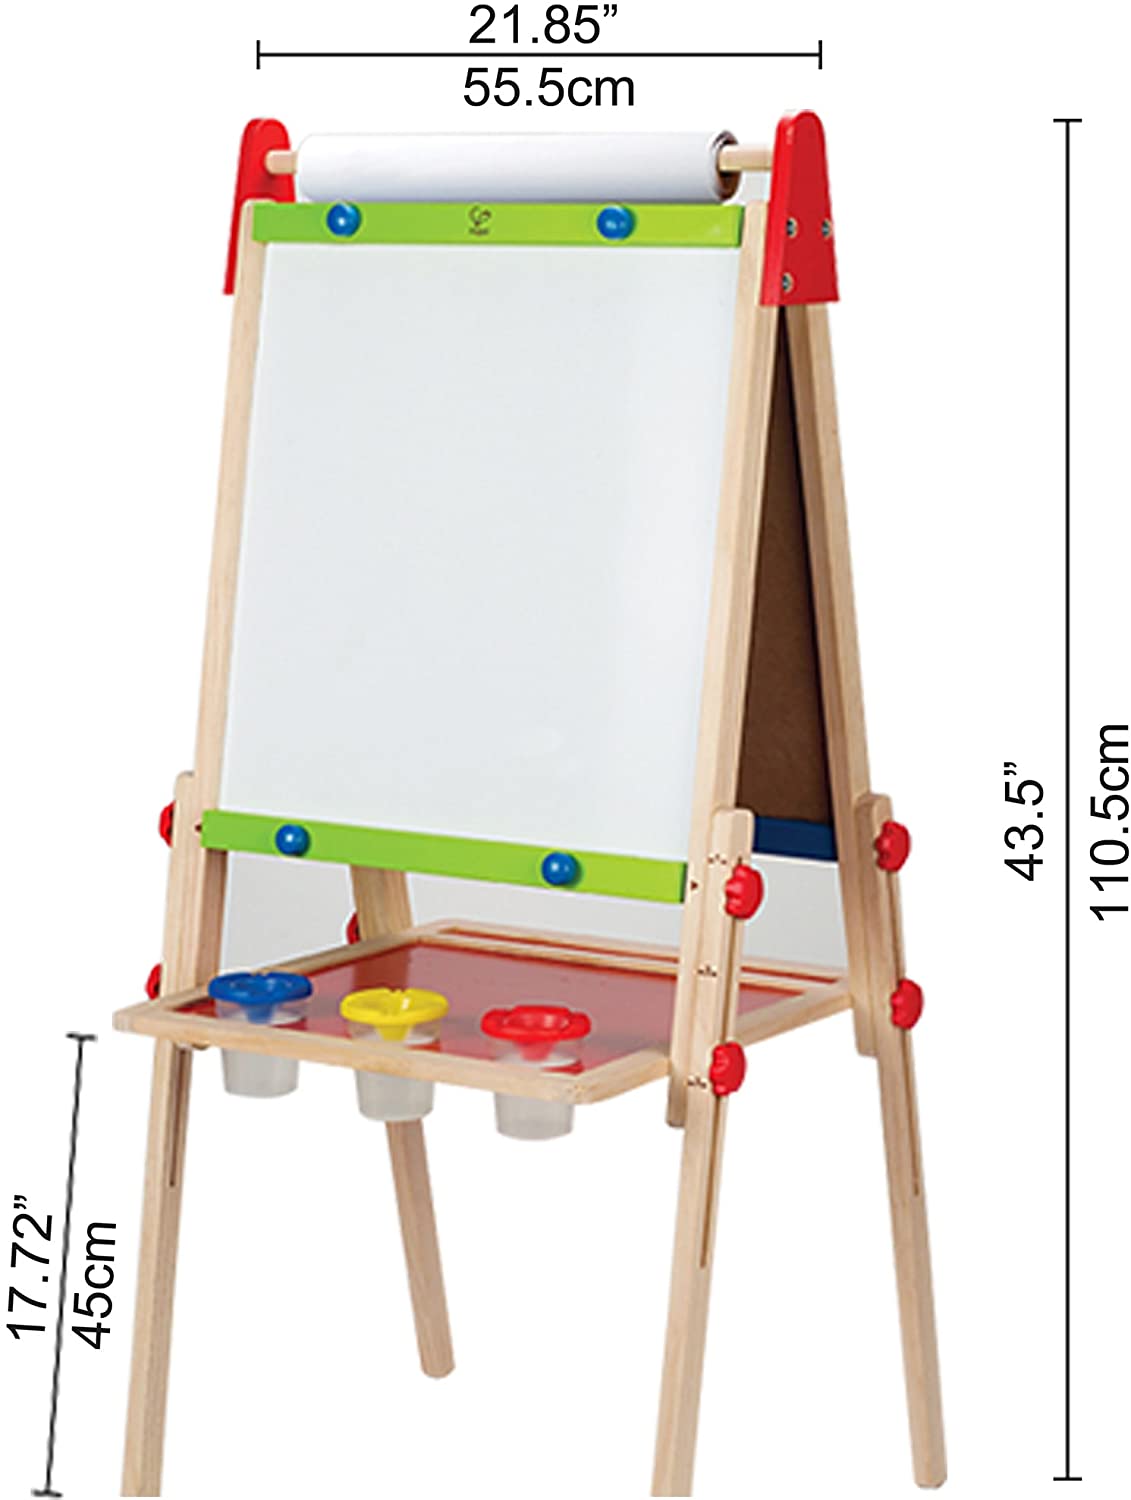 Hape E1010 All-in-One Easel - Magnetic Whiteboard, Chalkboard and Paper Roll Holder